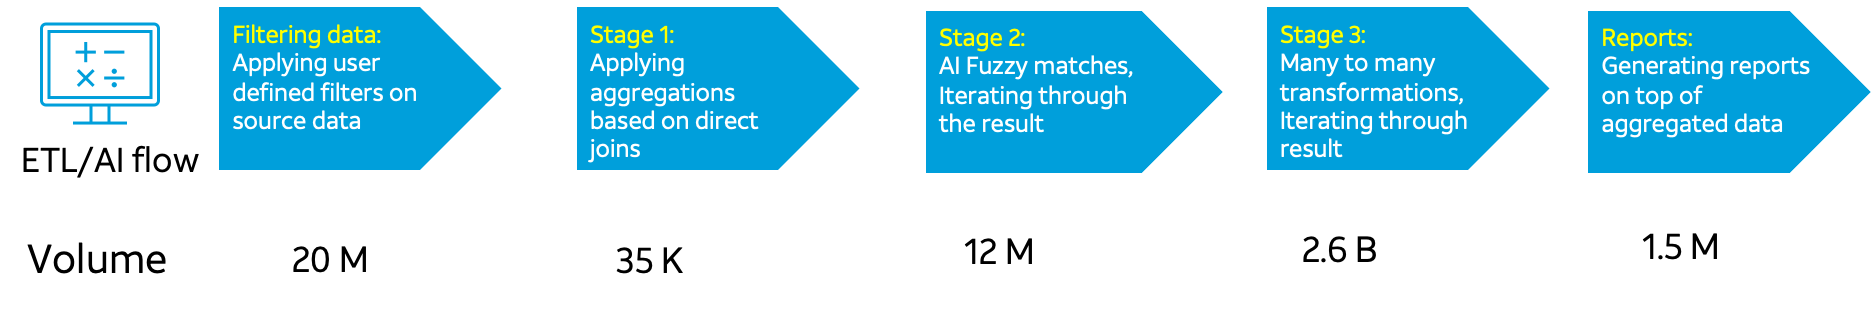 Diagram shows the ETL/AI pipeline and transformations for each stage: filtering data, applying aggregations, AI fuzzy matches, many-to-many transformations, and generating reports.